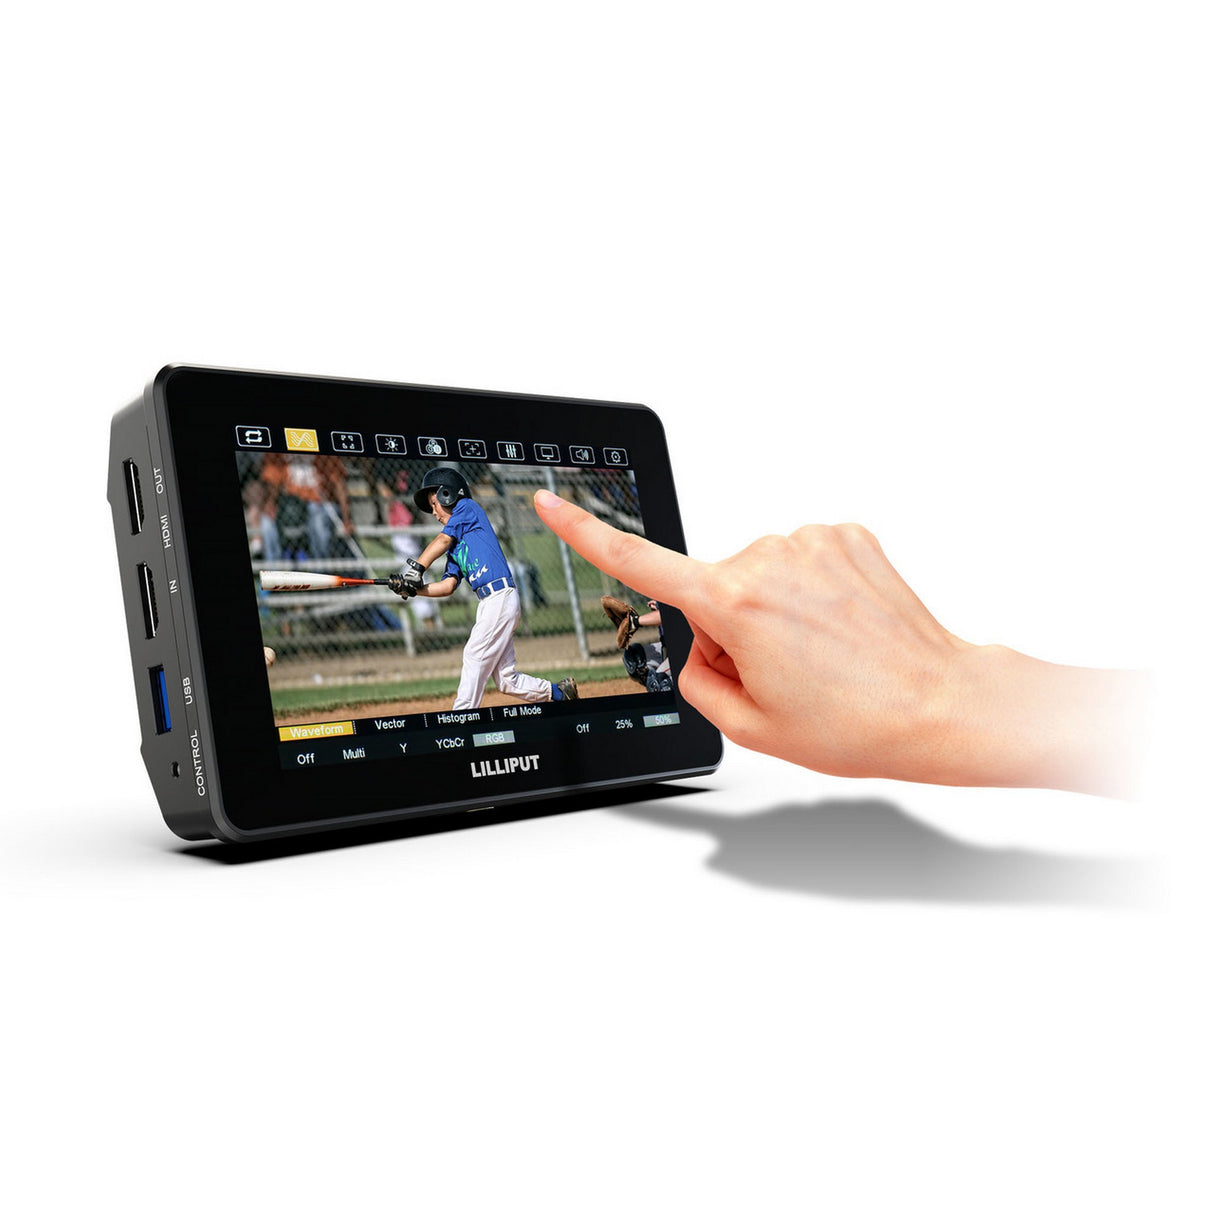 Lilliput HT5s 5.5-Inch Ultra High 2000 Nits Touch On-Camera Control Monitor